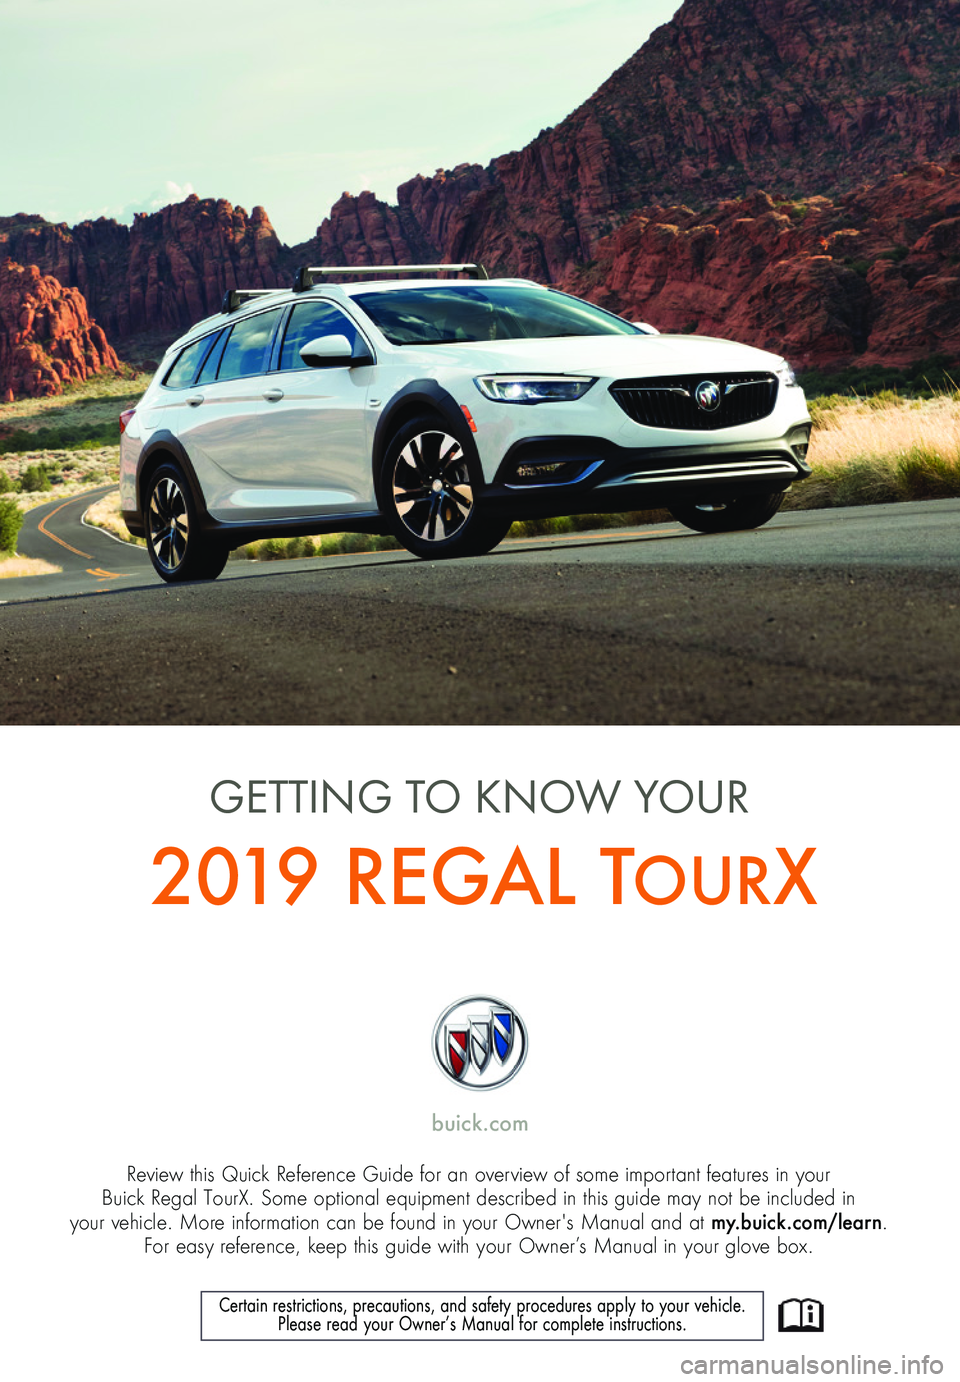 BUICK REGAL TOURX 2019  Get To Know Guide 